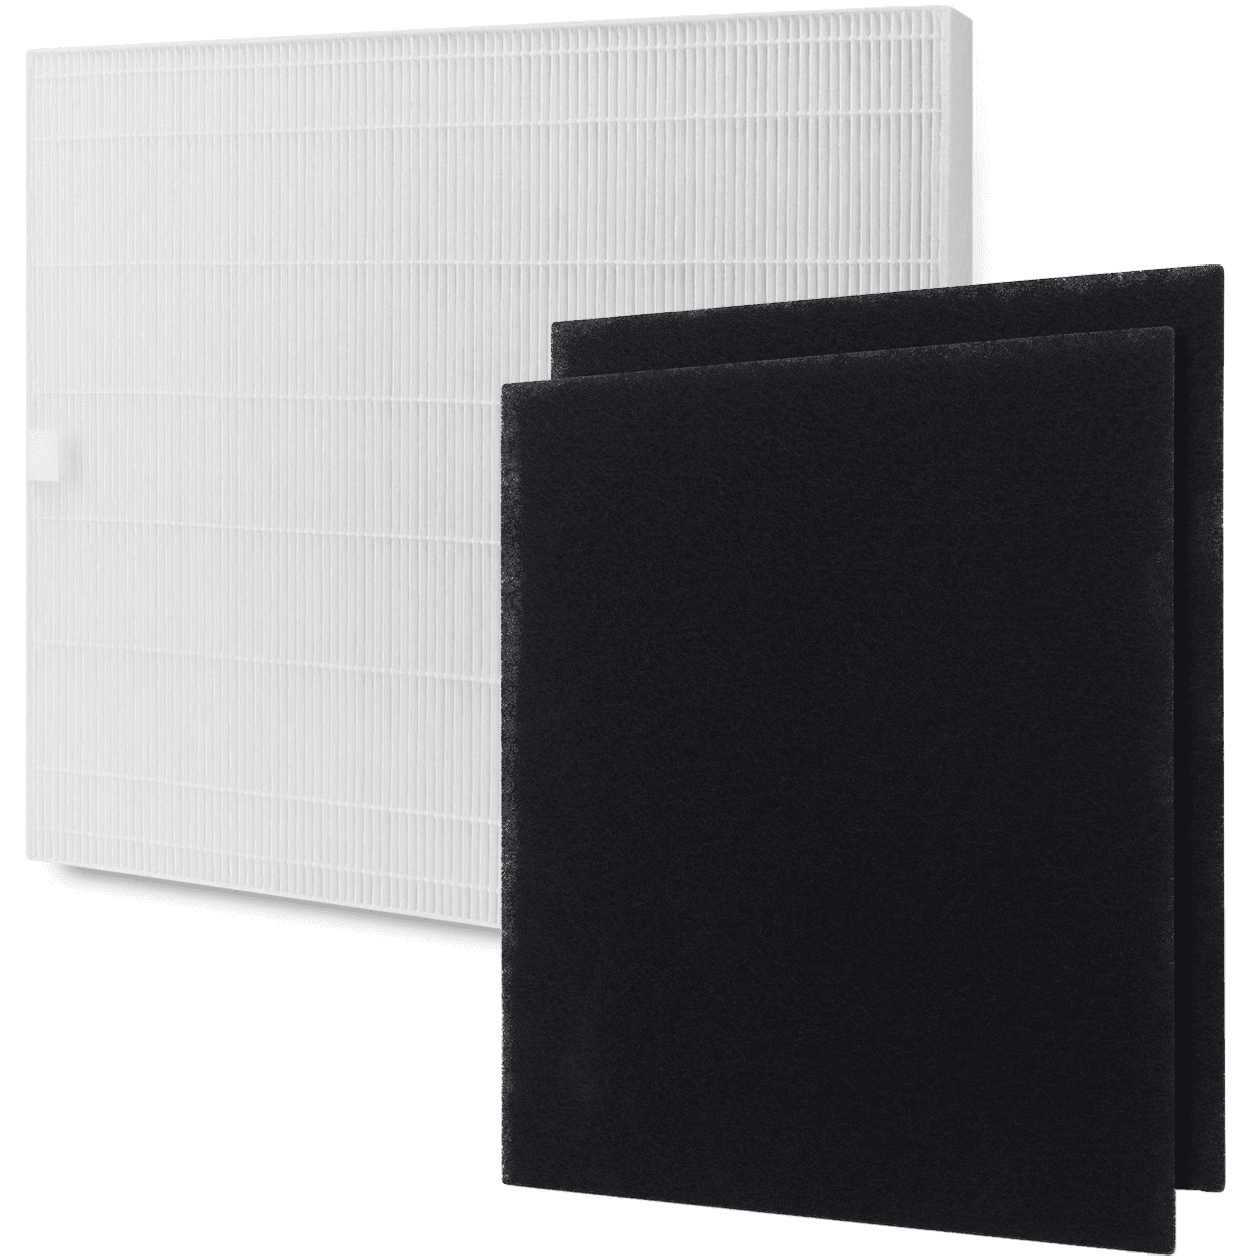 6 HEPA and 12 Carbon Replacement Filter set for Coway AP-1216-FP AP-1216L